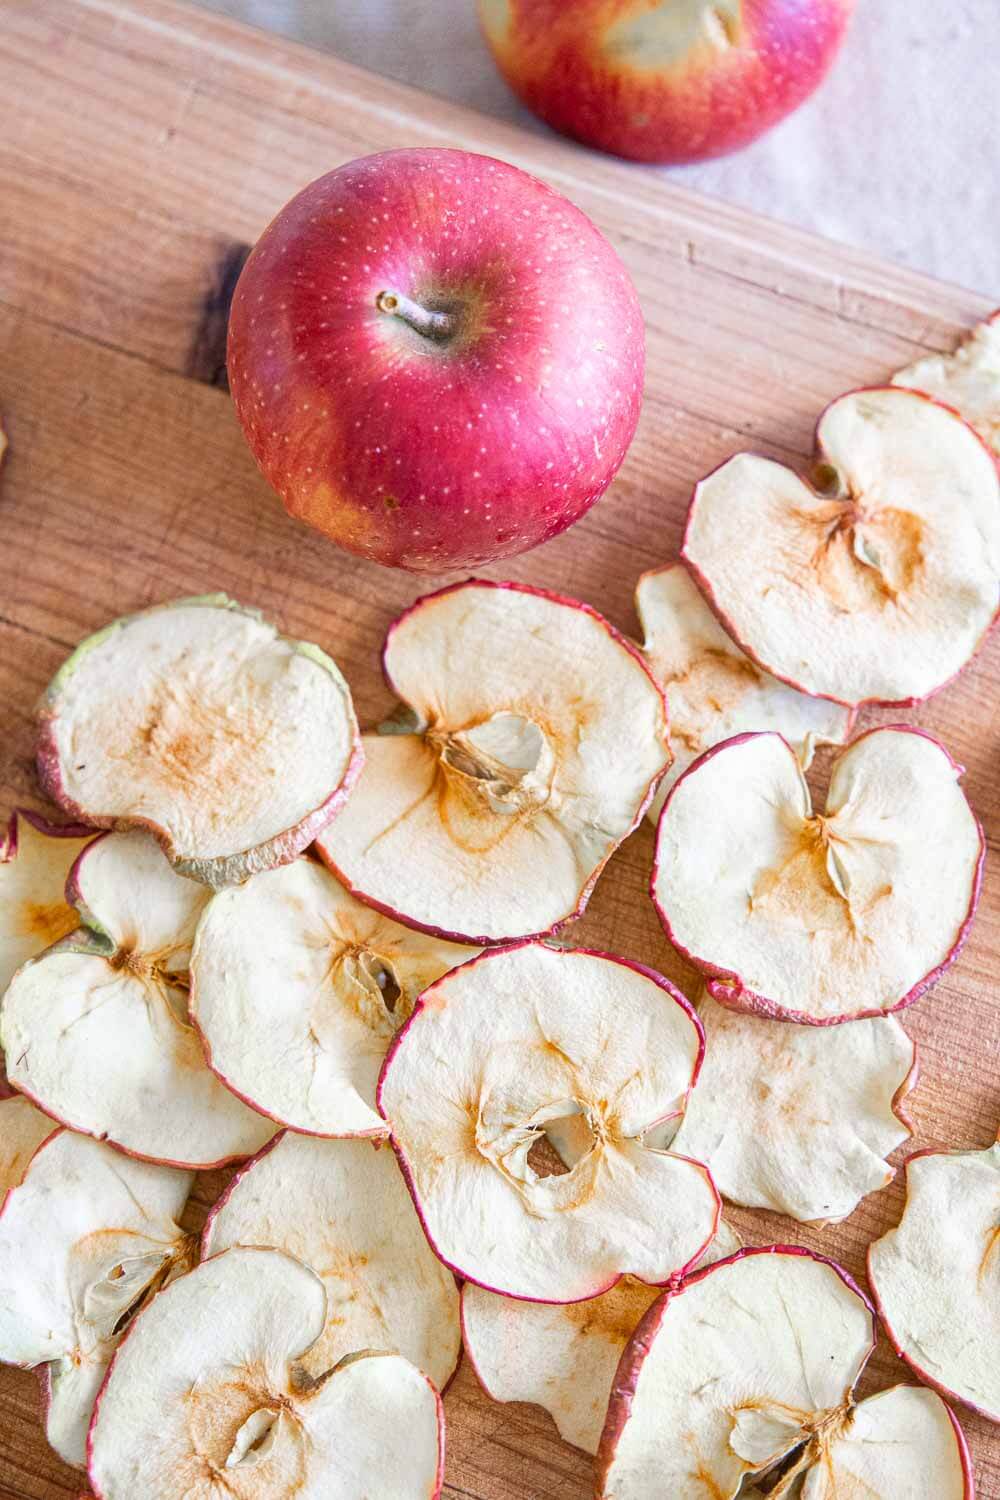 How to Dry Apple Slices for Decoration